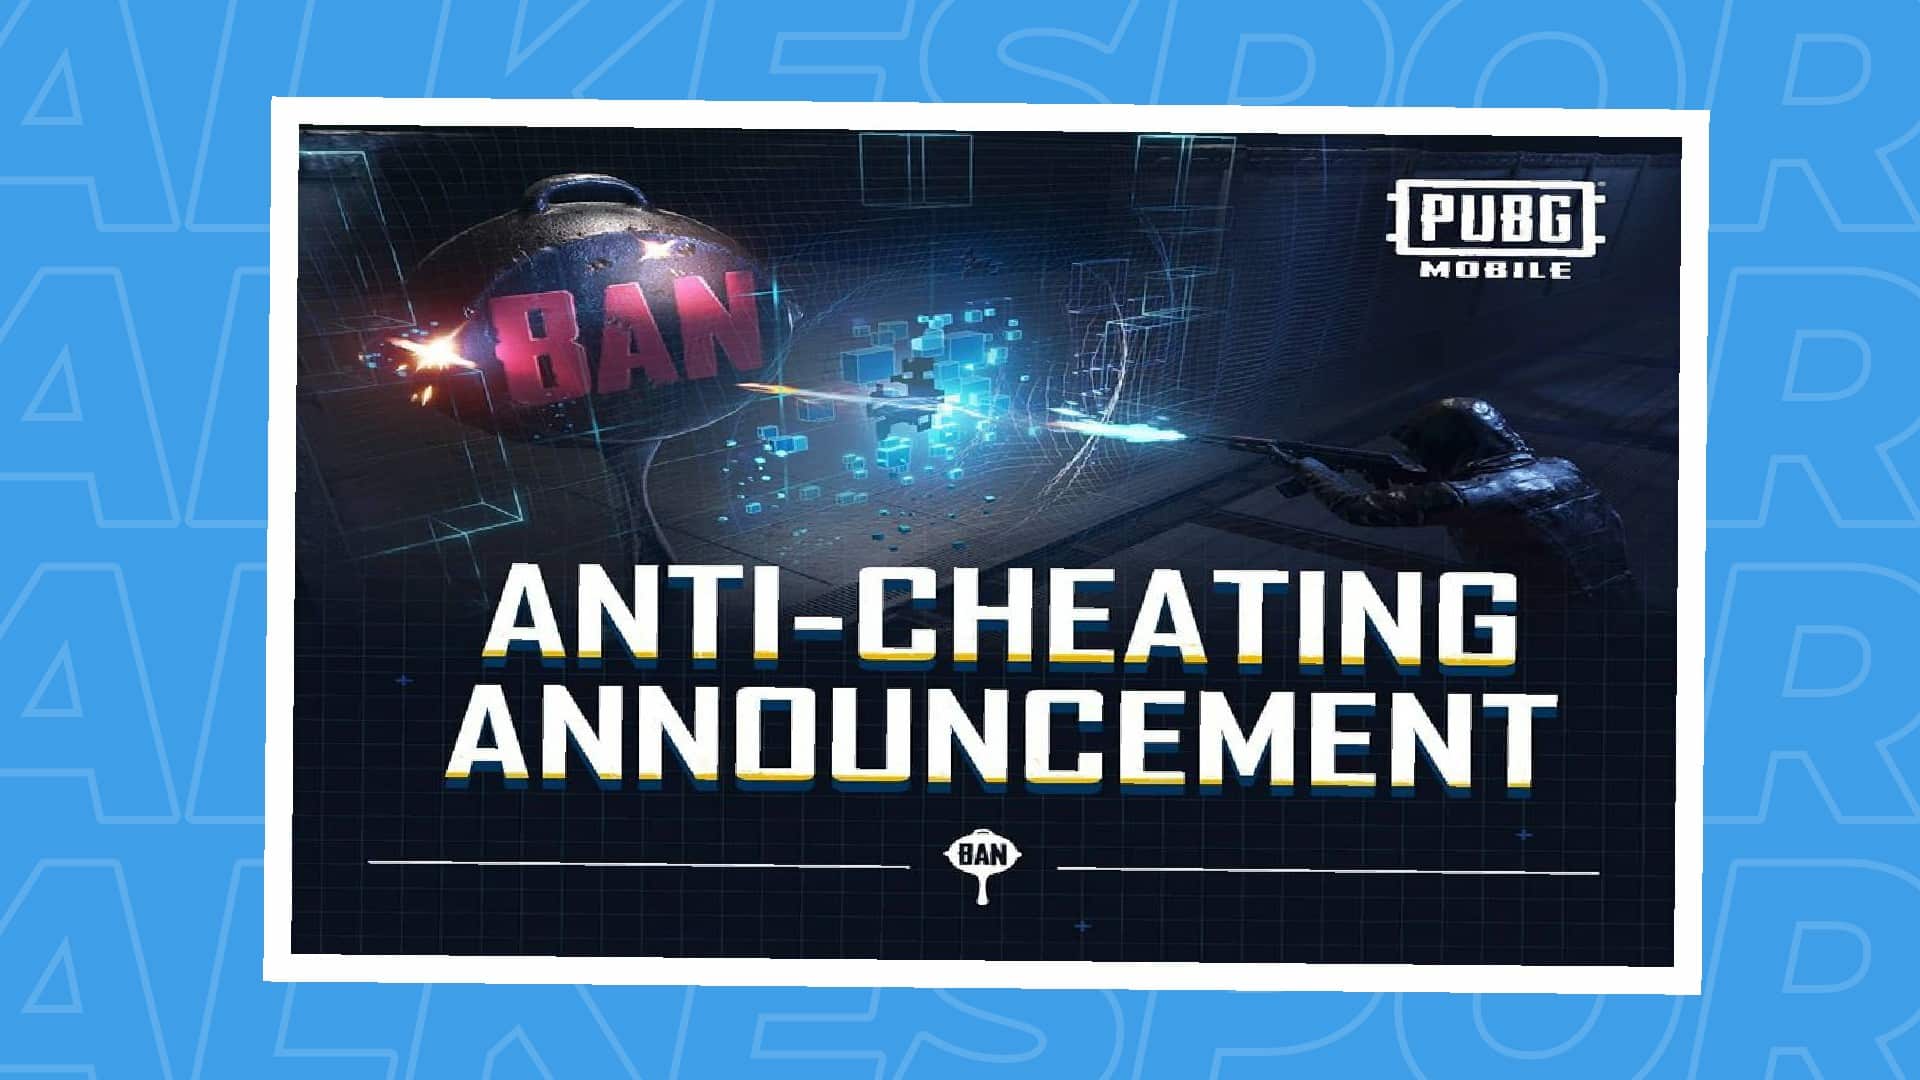 Pubg Mobile Anti Cheat 2 2 Million Accounts Banned For Hacking Talkesport